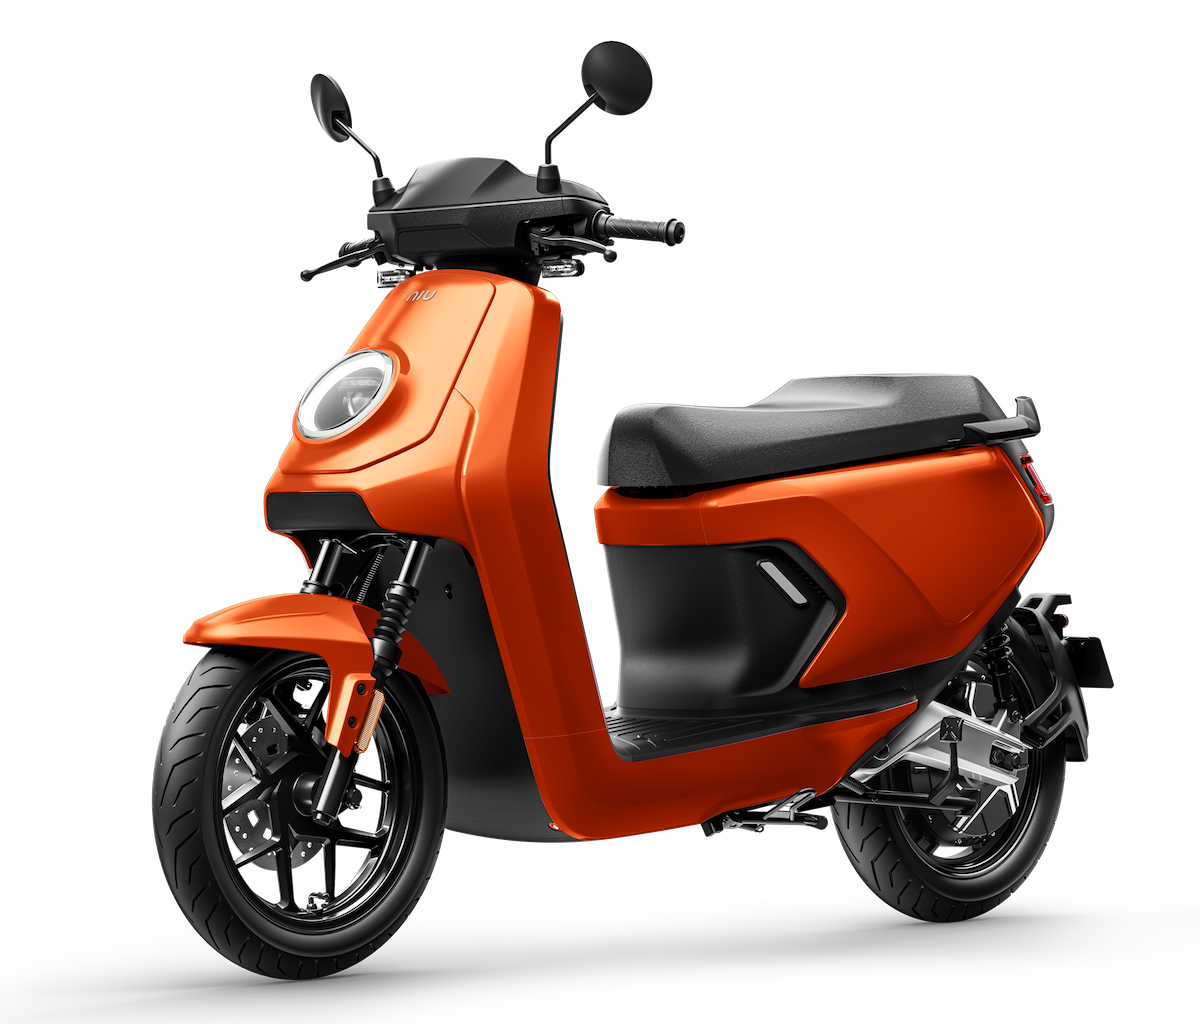 Niu unveils its fastest electric scooter, plus bikes, motorbike at EICMA 2021